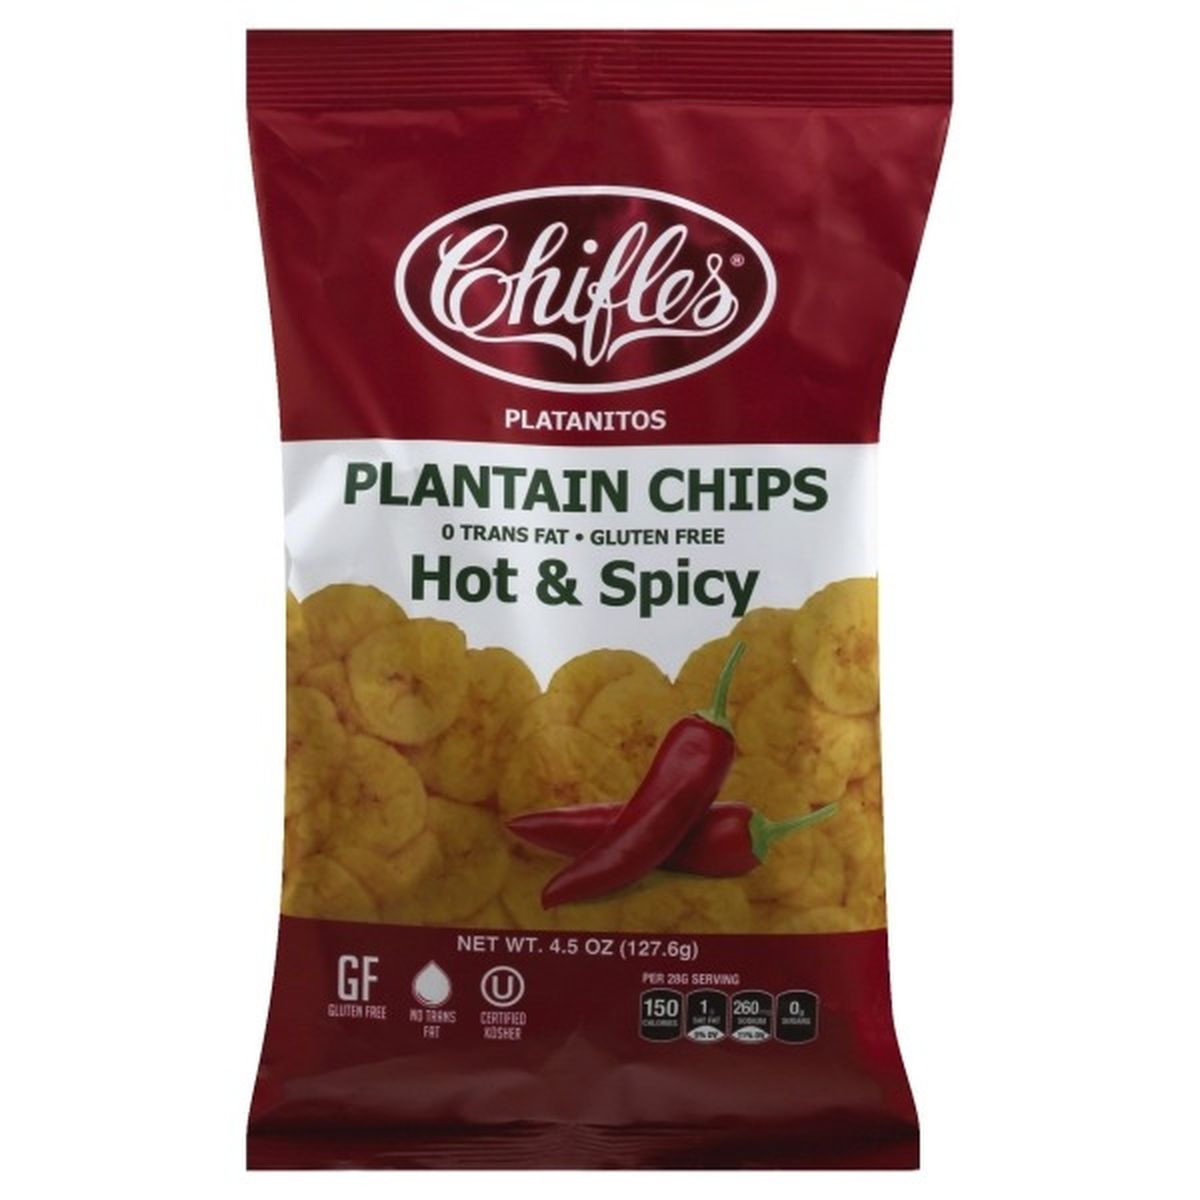 Calories in Chifles Plantain Chips, Hot & Spicy